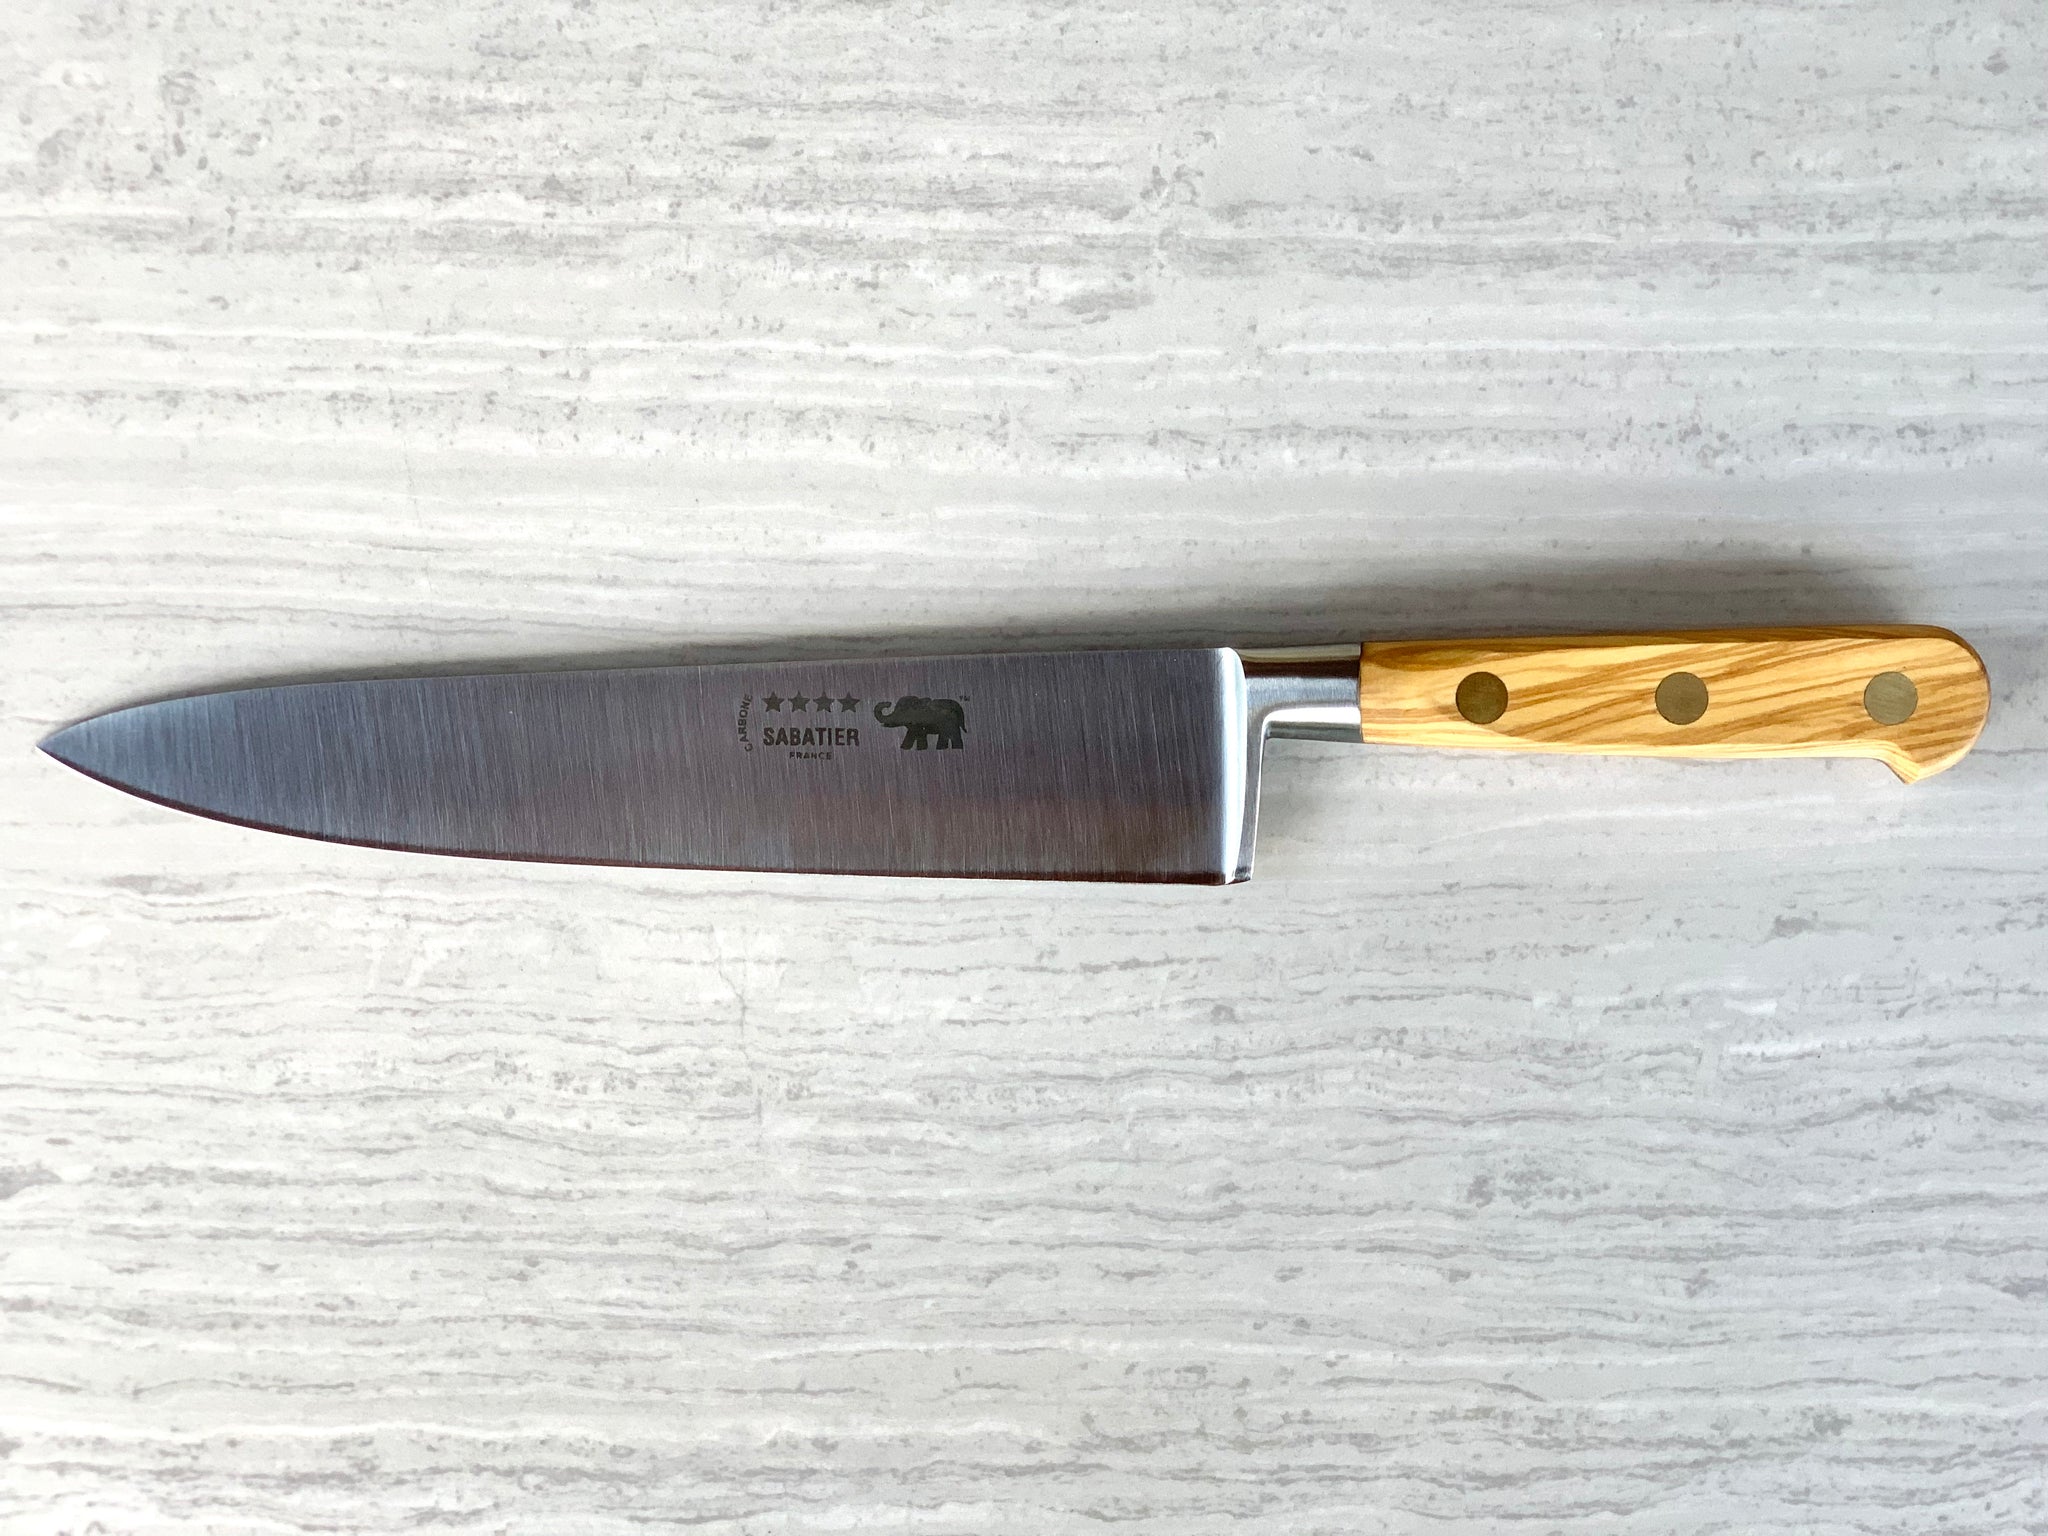 Chef Knife: 8 Inch CARBON